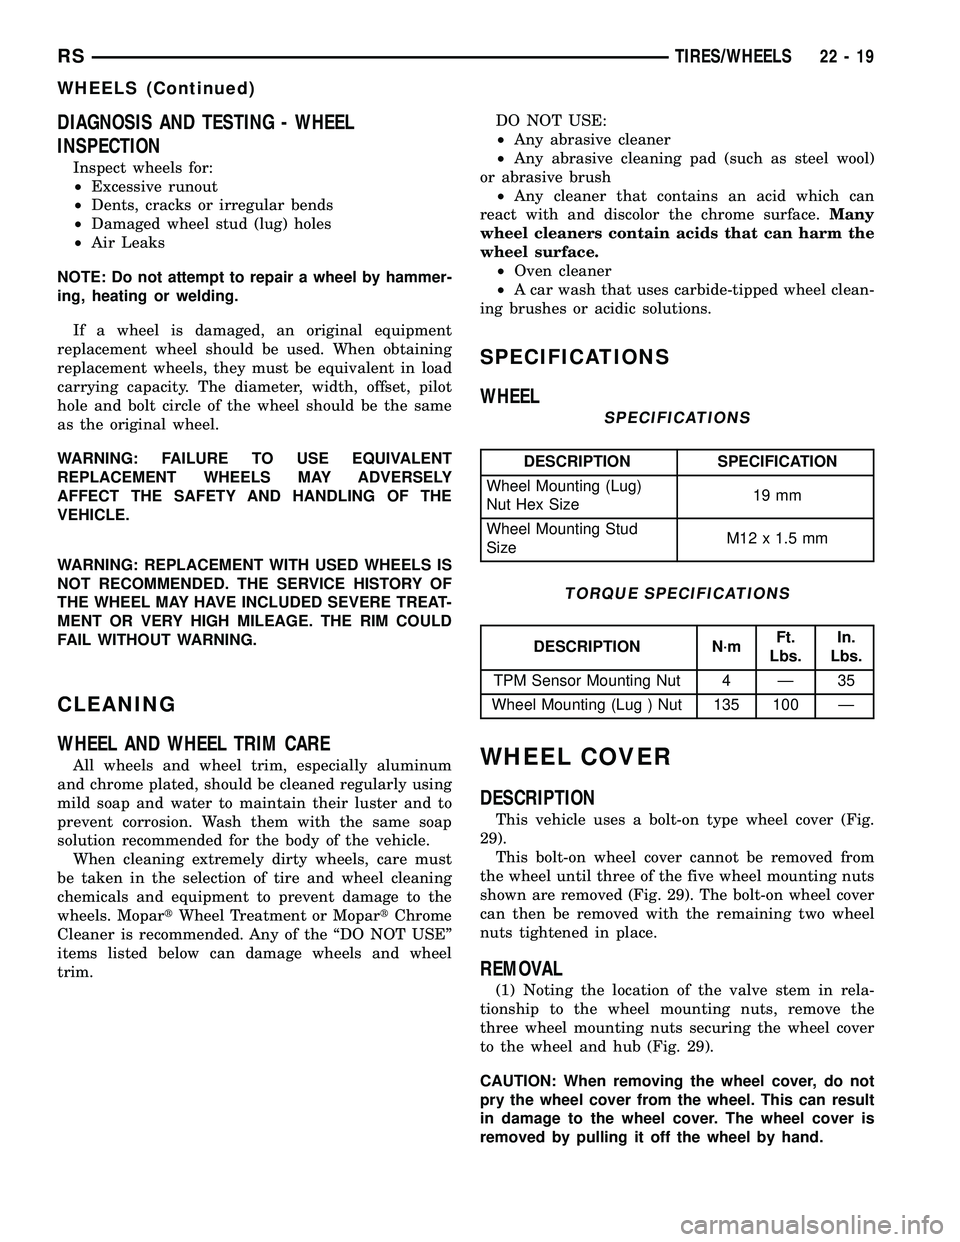 CHRYSLER VOYAGER 2005 User Guide DIAGNOSIS AND TESTING - WHEEL
INSPECTION
Inspect wheels for:
²Excessive runout
²Dents, cracks or irregular bends
²Damaged wheel stud (lug) holes
²Air Leaks
NOTE: Do not attempt to repair a wheel b